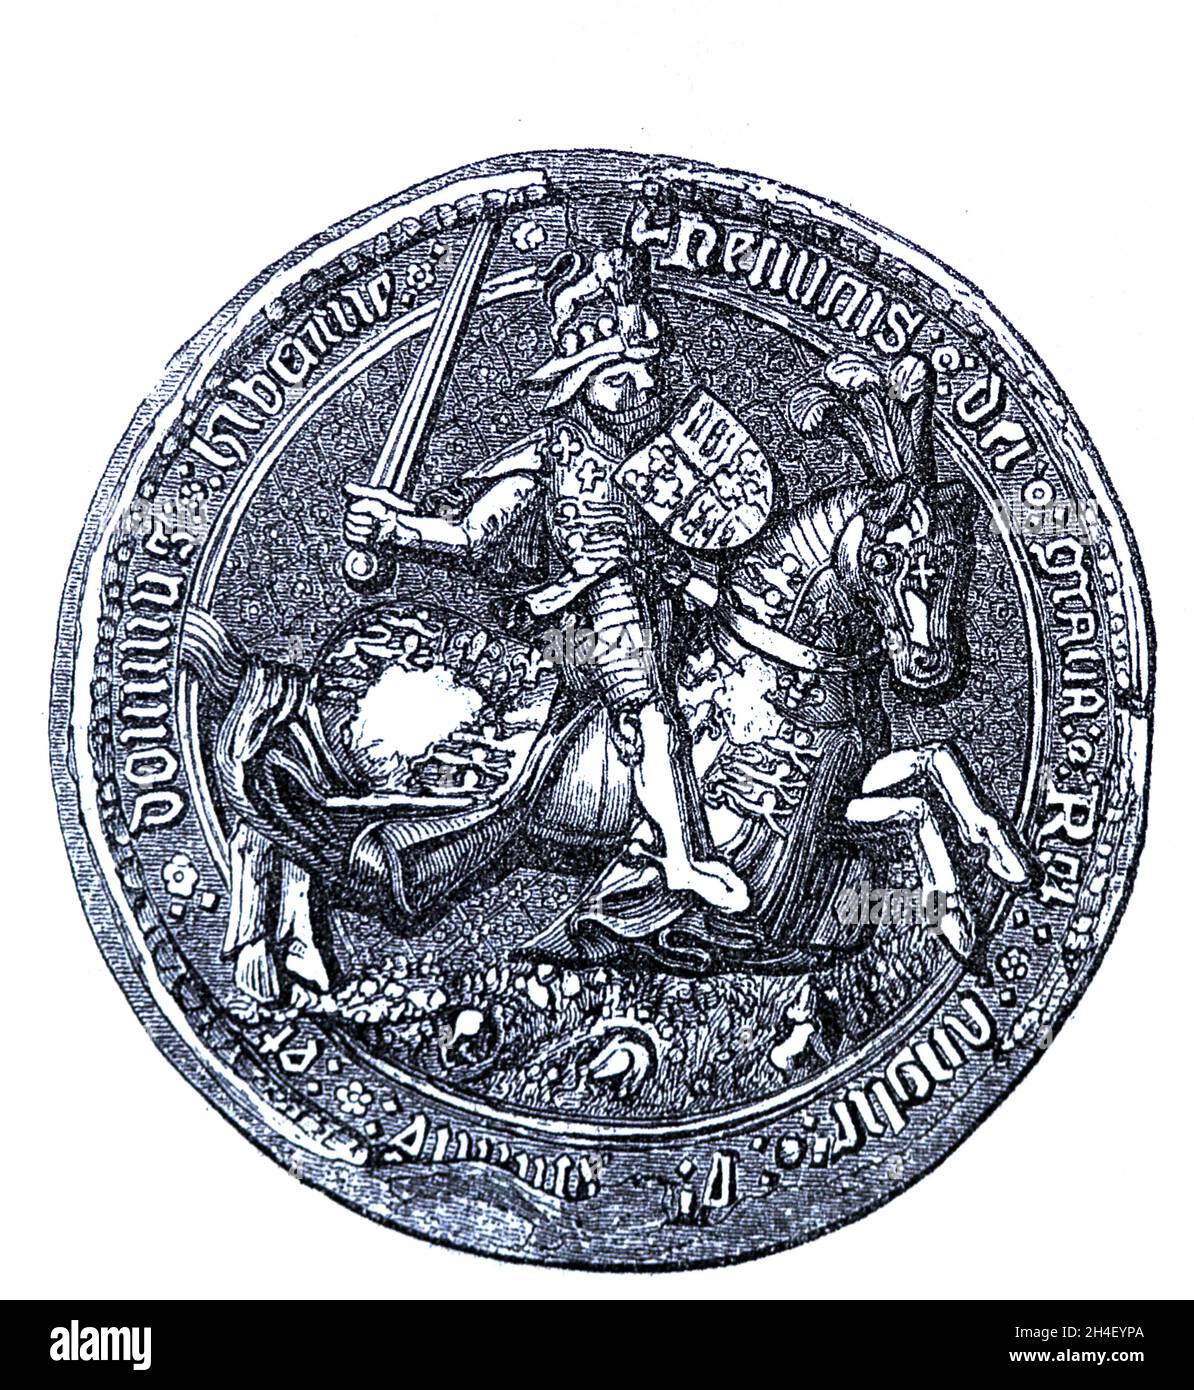 Great seal of Henry VII of England (1457-1509). Engraving, 19th century. Stock Photo